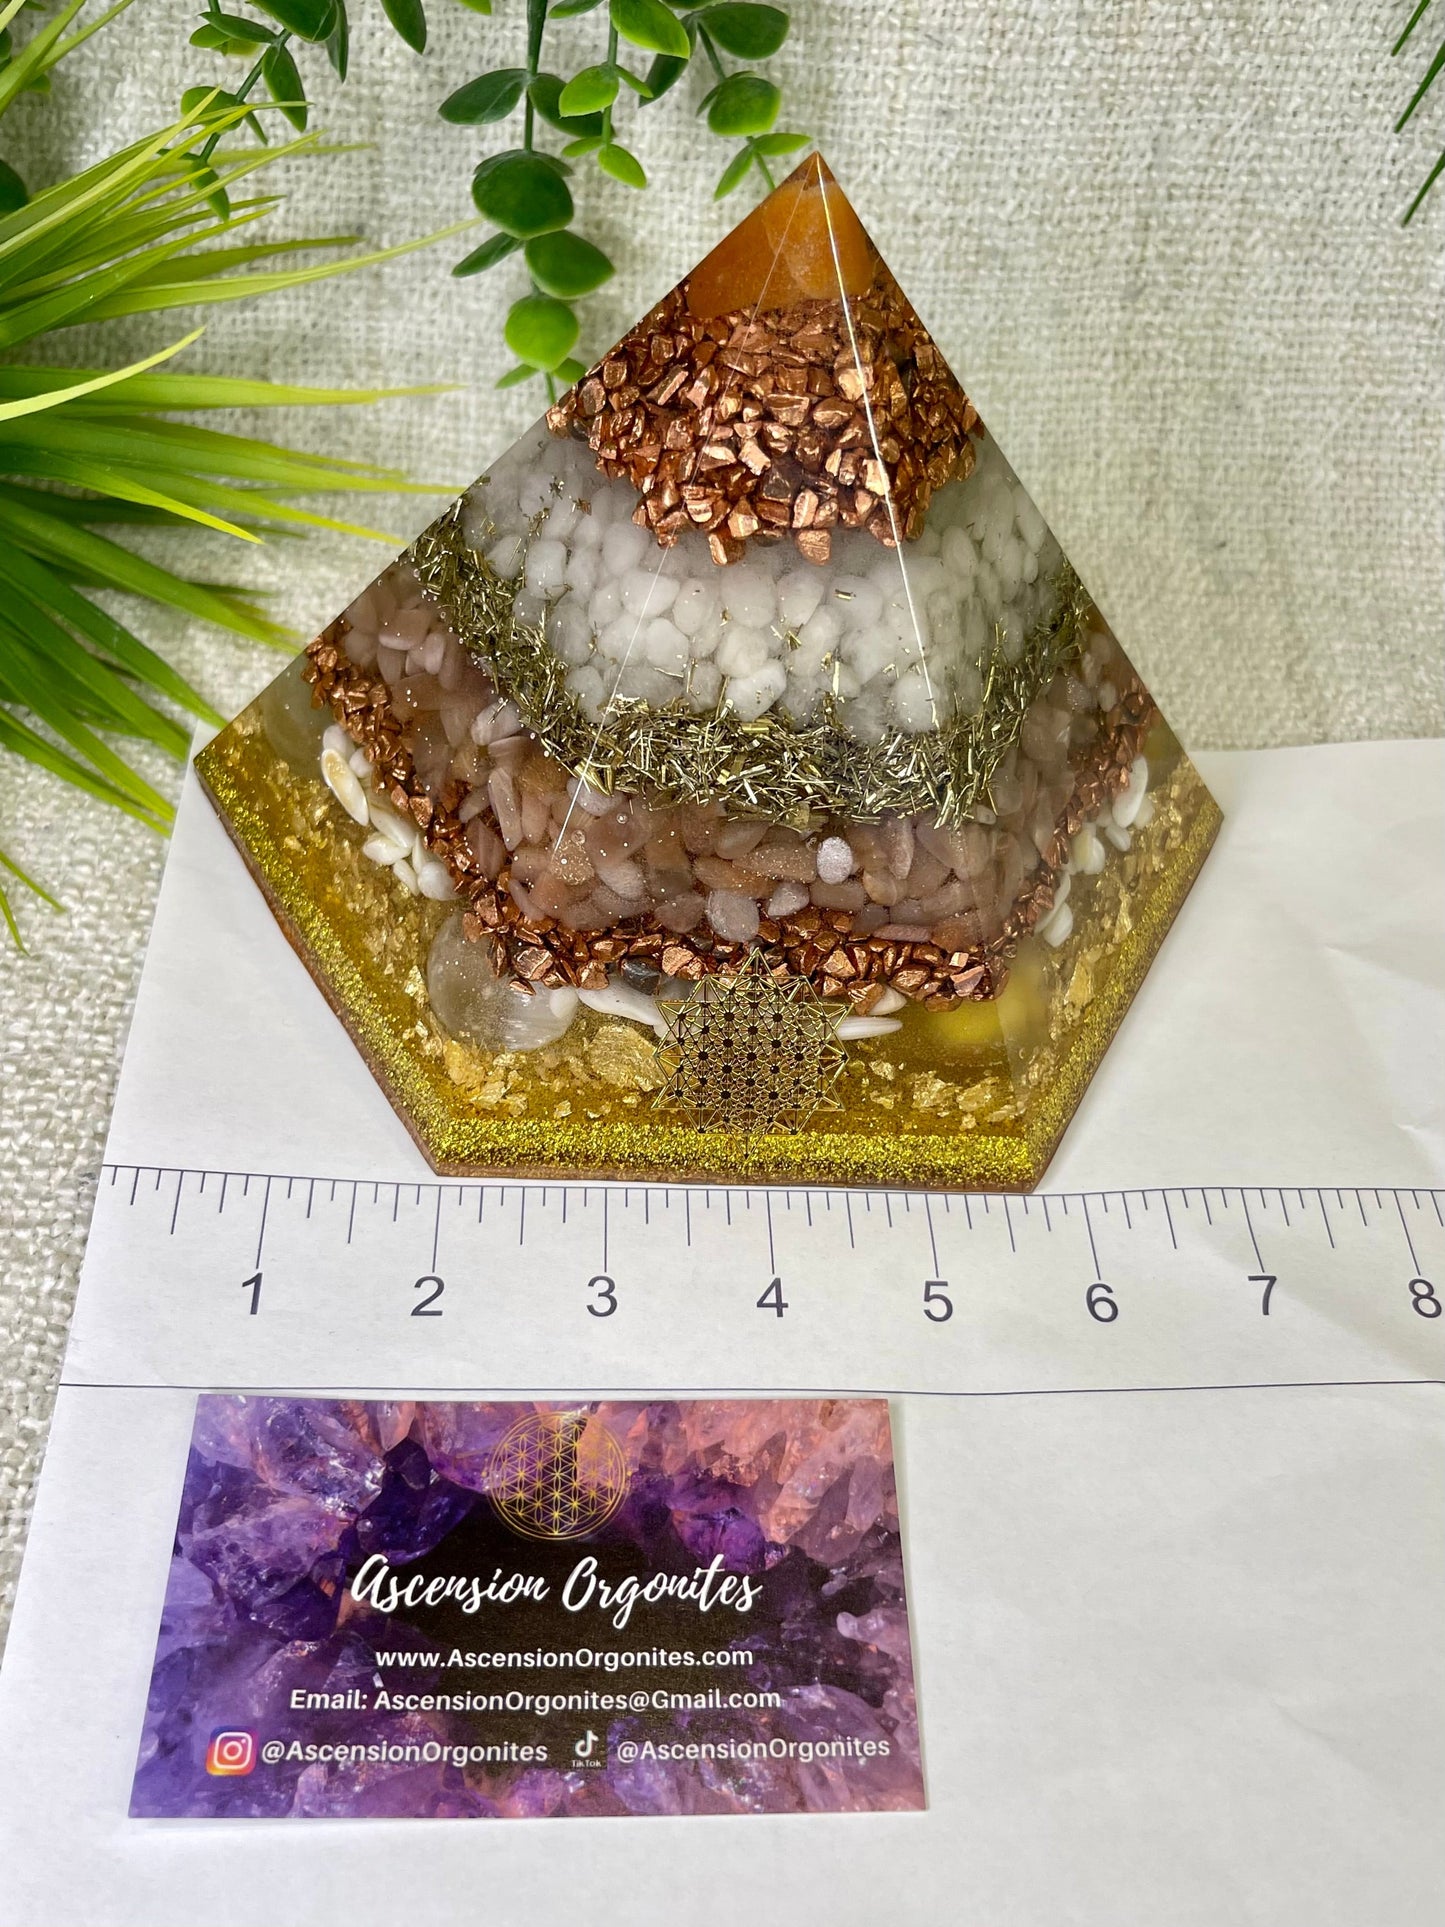 EVA - Special Edition Hexagonal Pyramid! - EMF Protector - Carnelian, White Quartz, Peach Moonstone, Selenite Crystals with Copper, Brass and Real 24k Gold Leaf